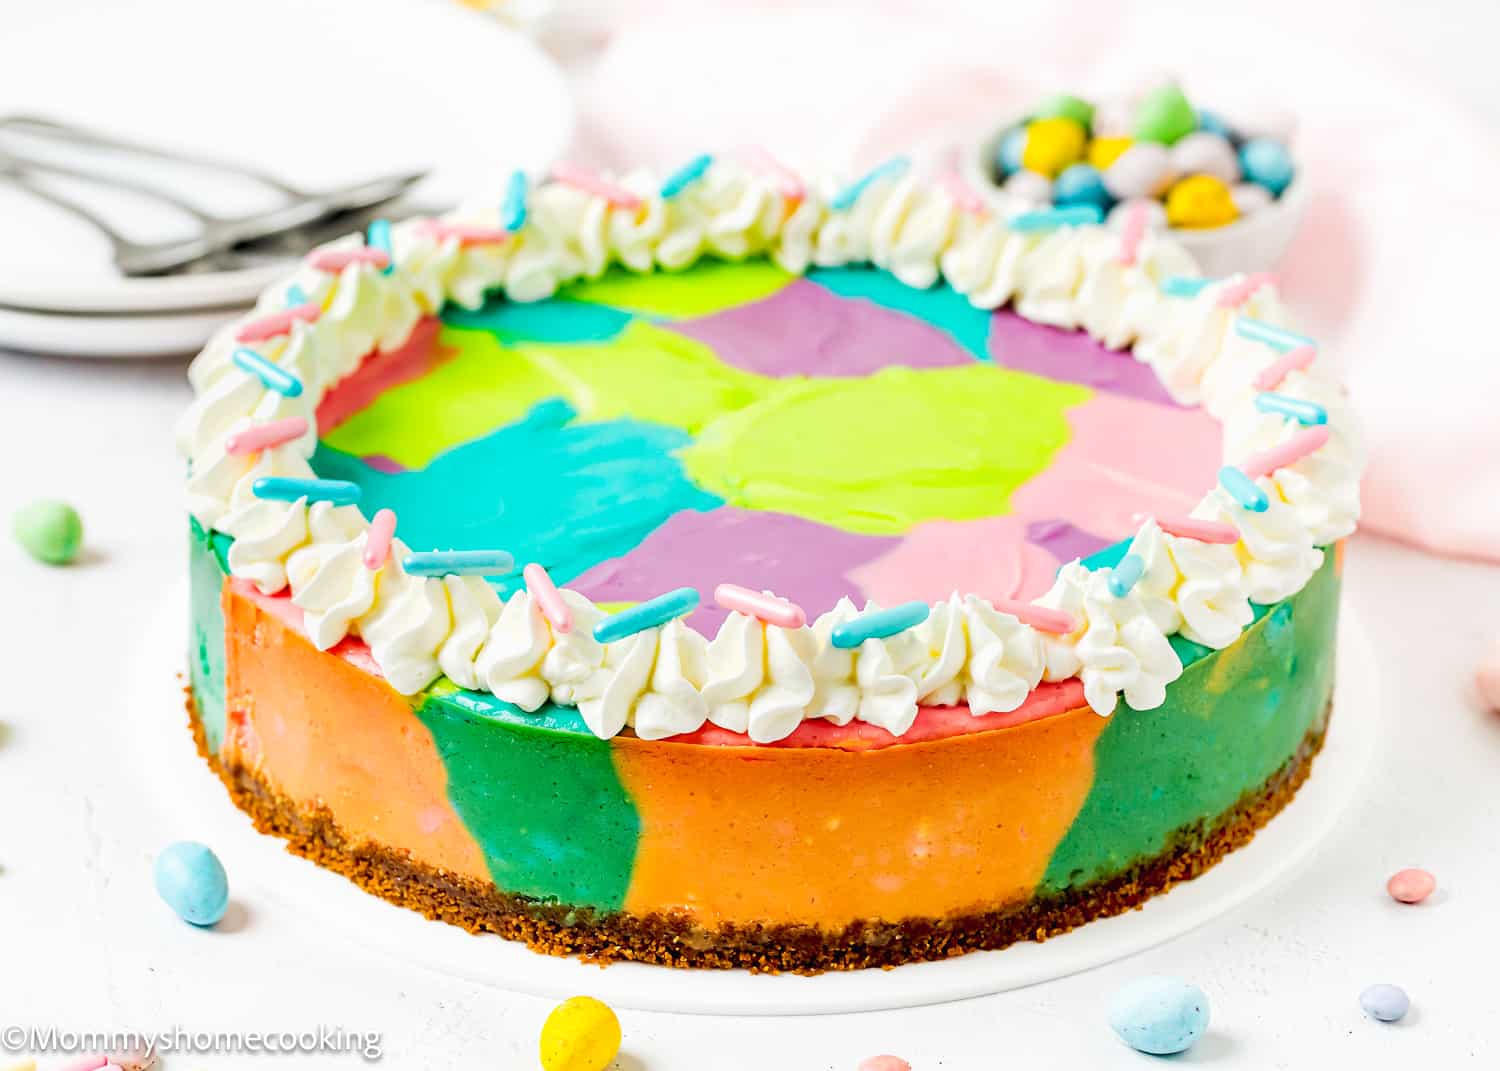 whole Easy Baked Easter Cheesecake (Egg-free) over a white surface with chocolate eggs and sprinkles.